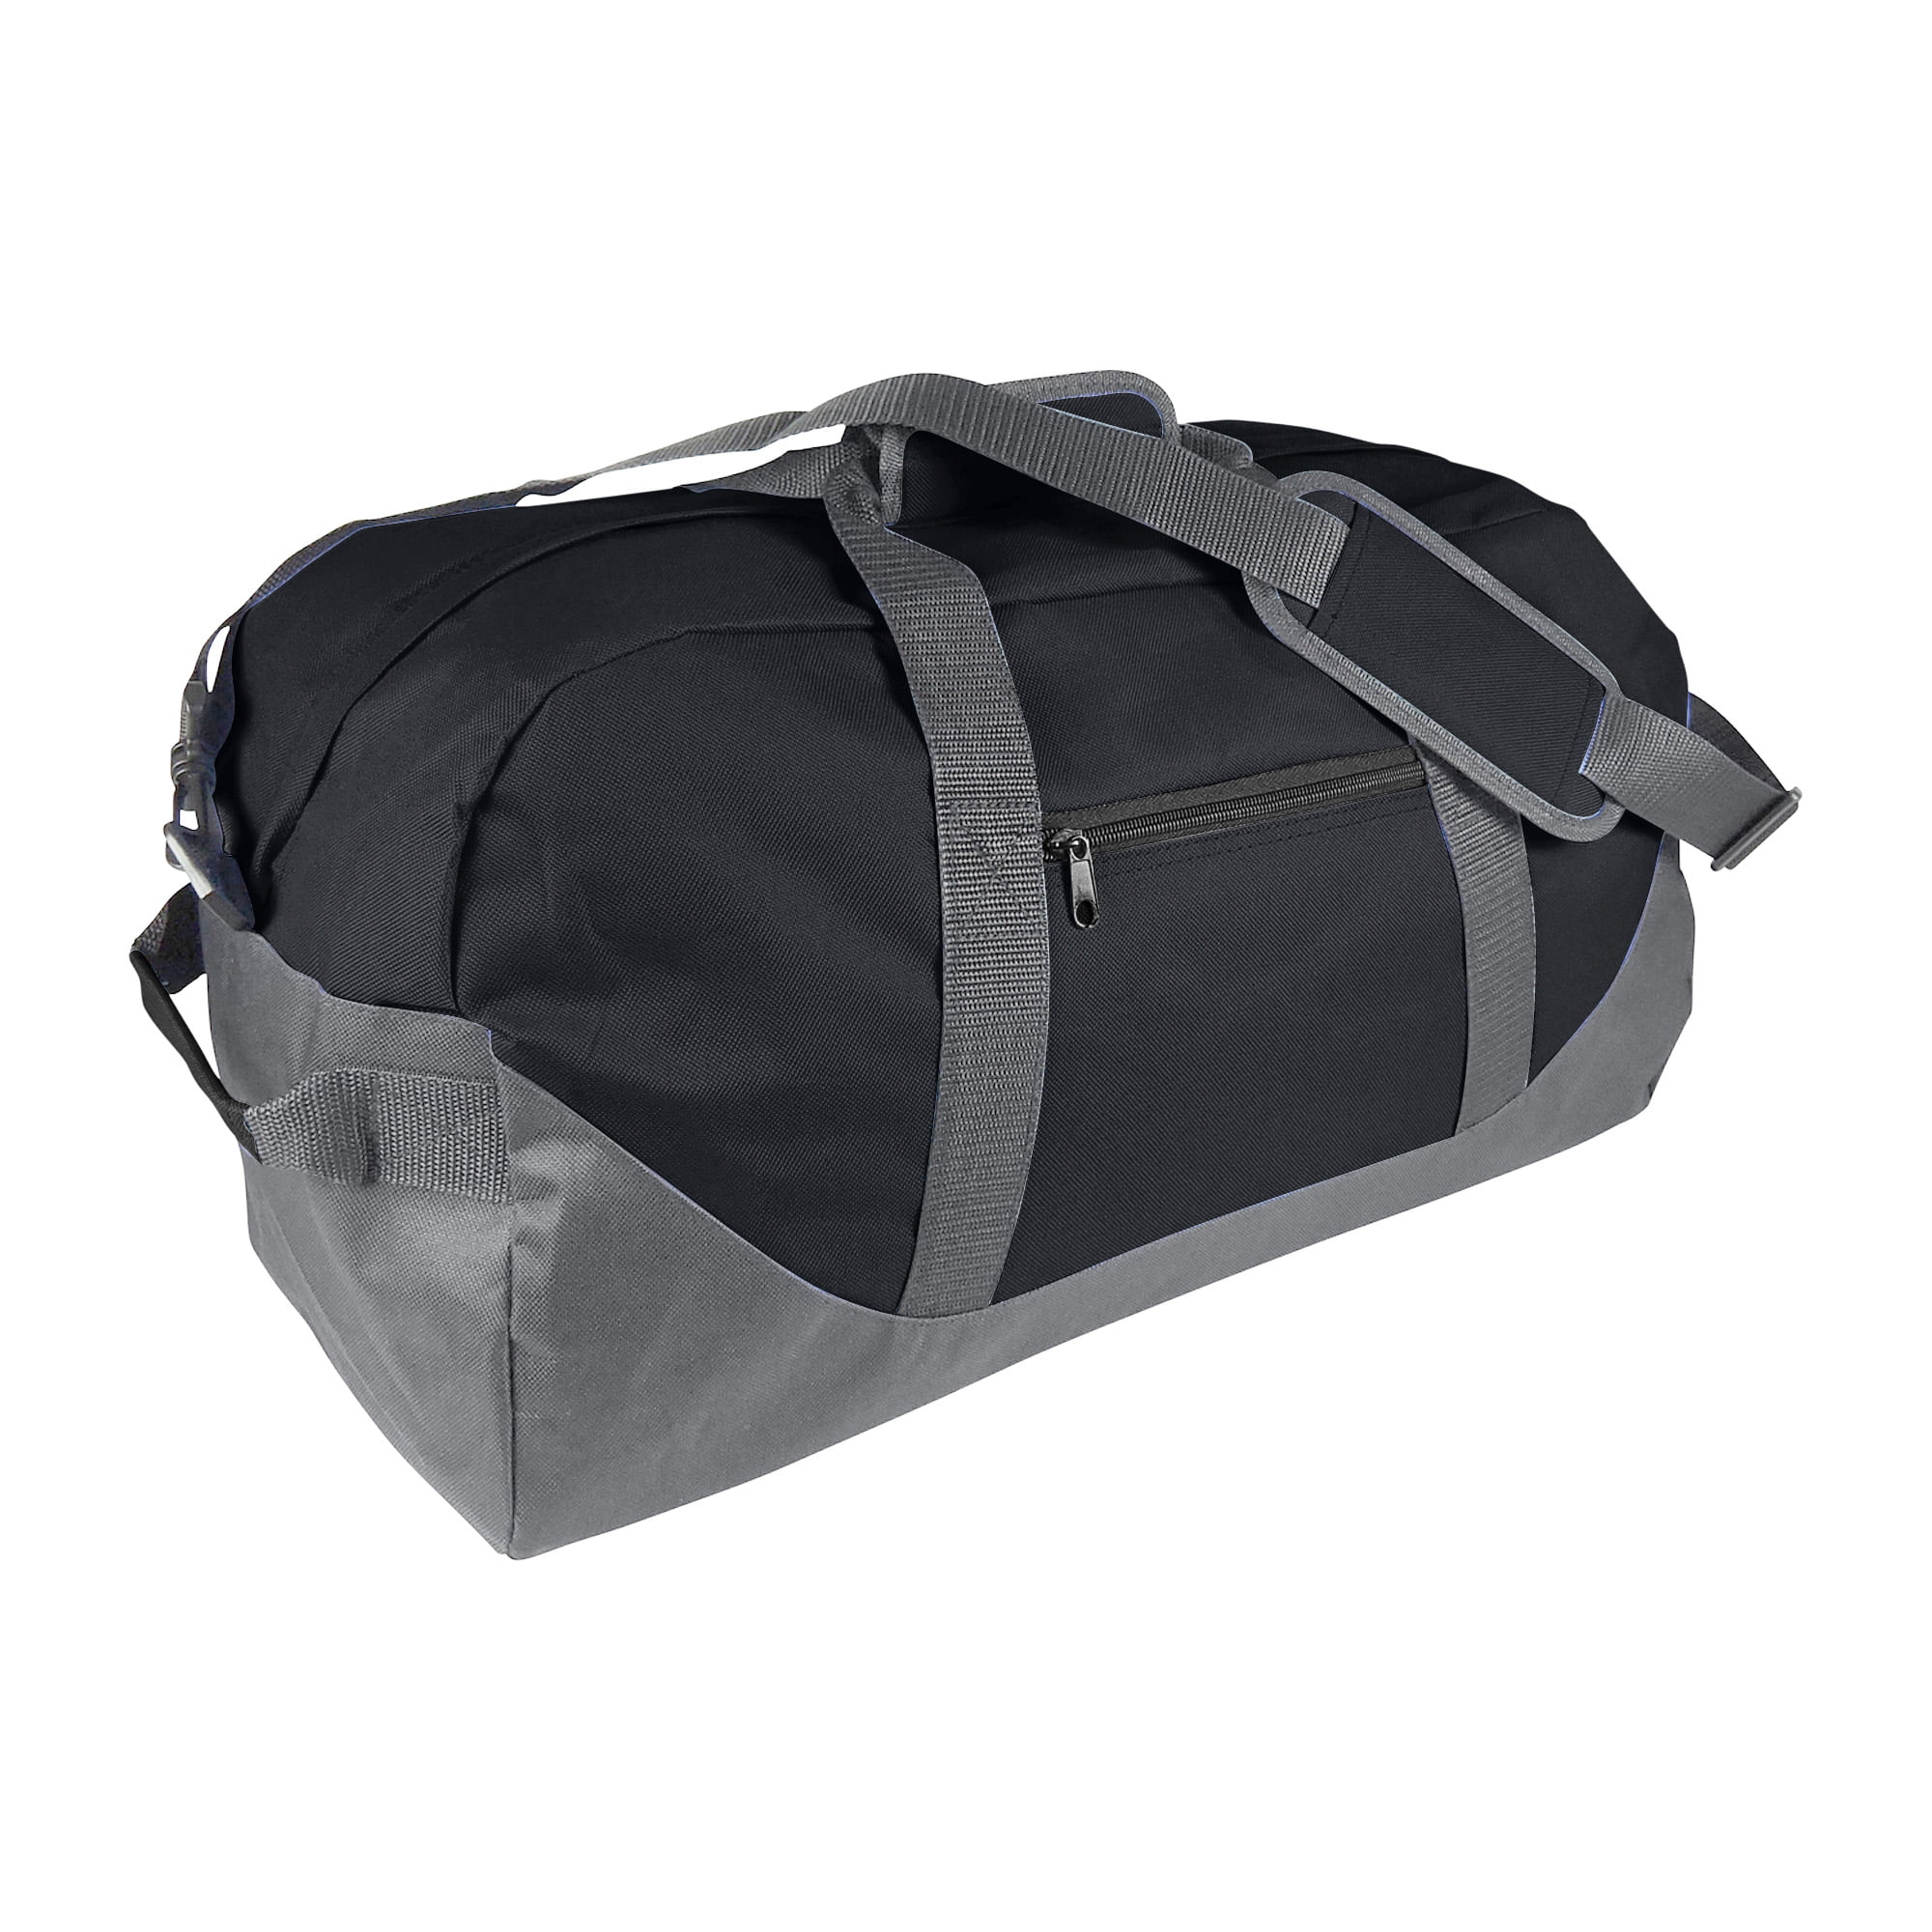 21 Large Duffle Bag with Adjustable Strap in Black and Gray - www.semashow.com - www.semashow.com